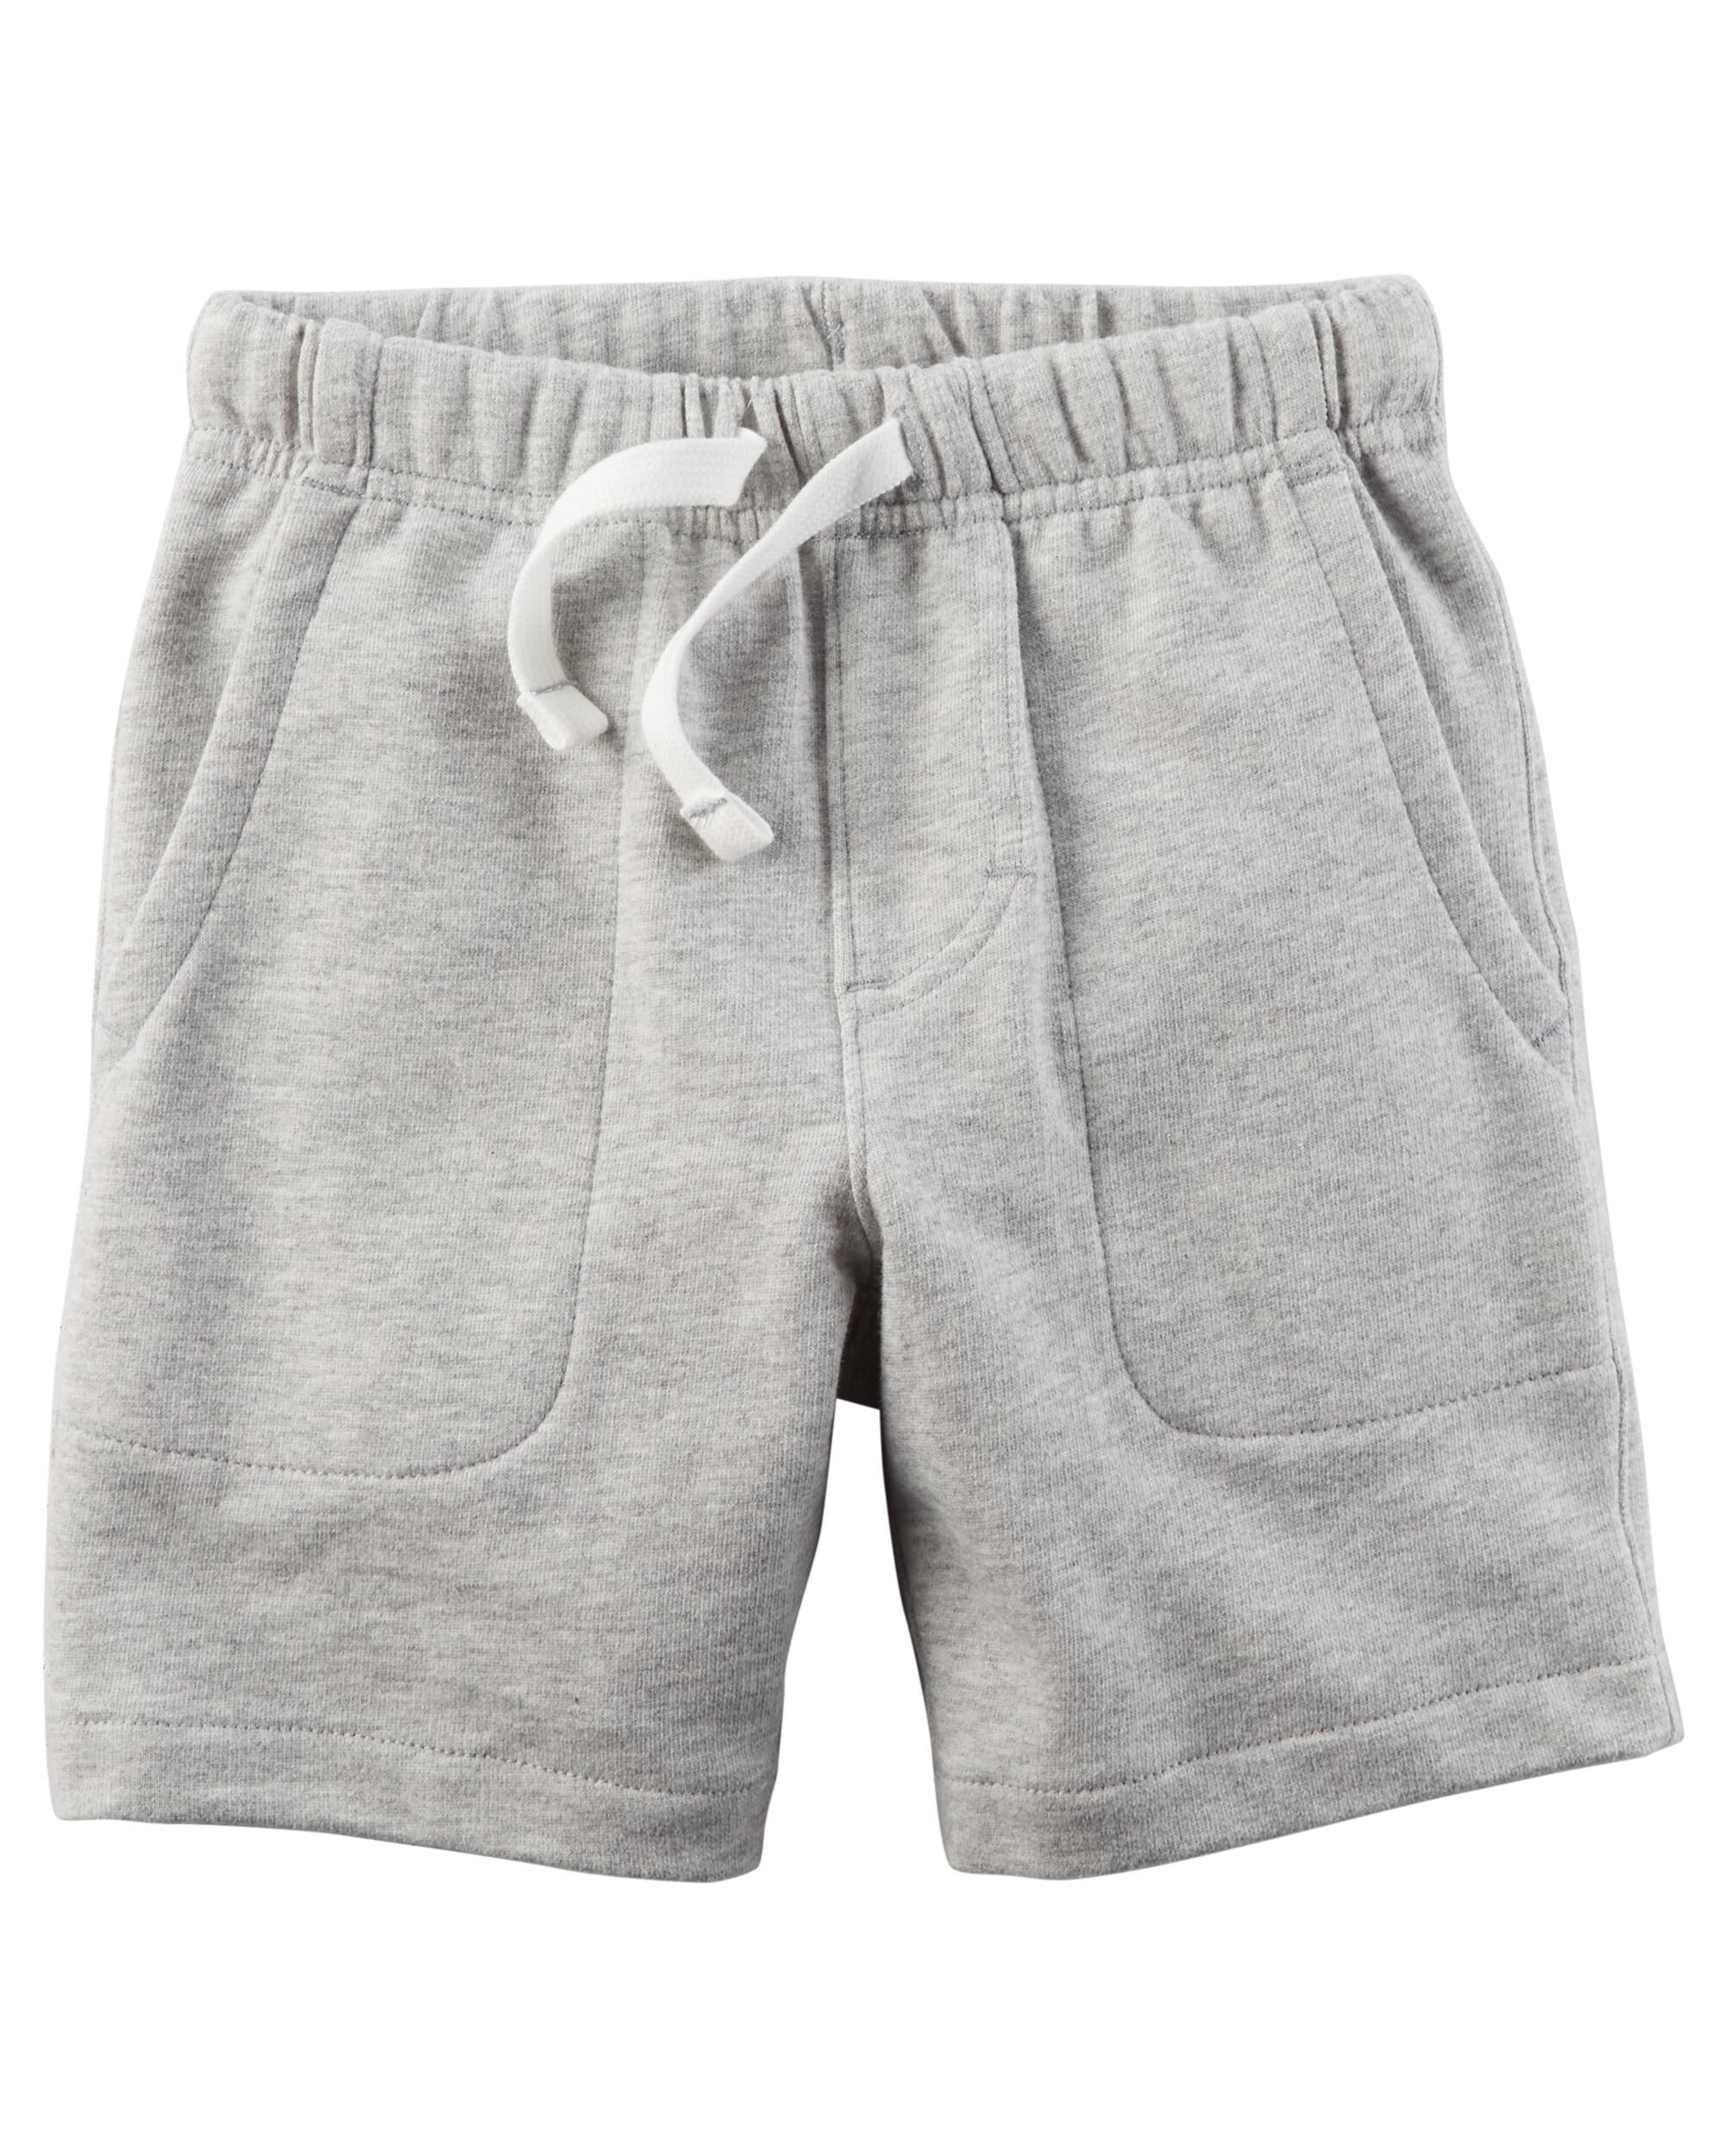 Easy Pull-On French Terry Shorts | Carters.com